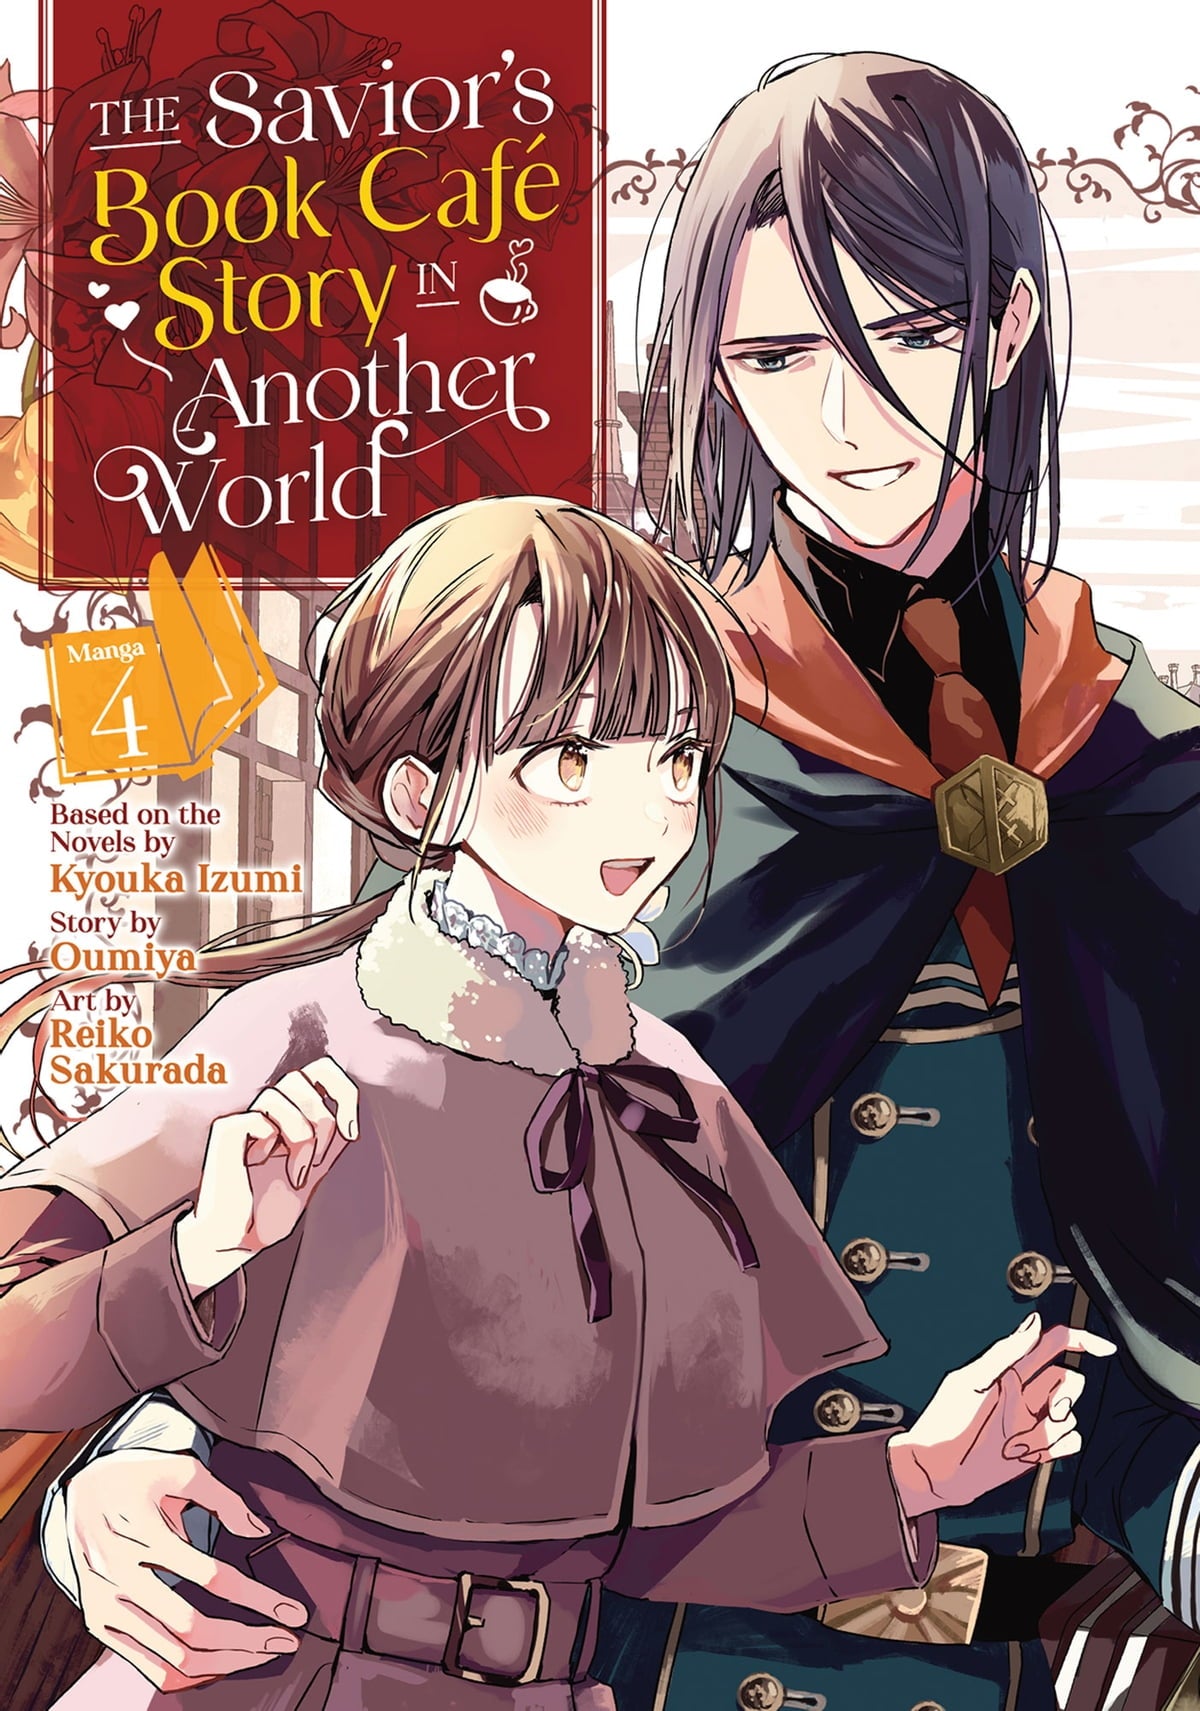 The Savior's Book Café Story in Another World (Manga) Vol. 04